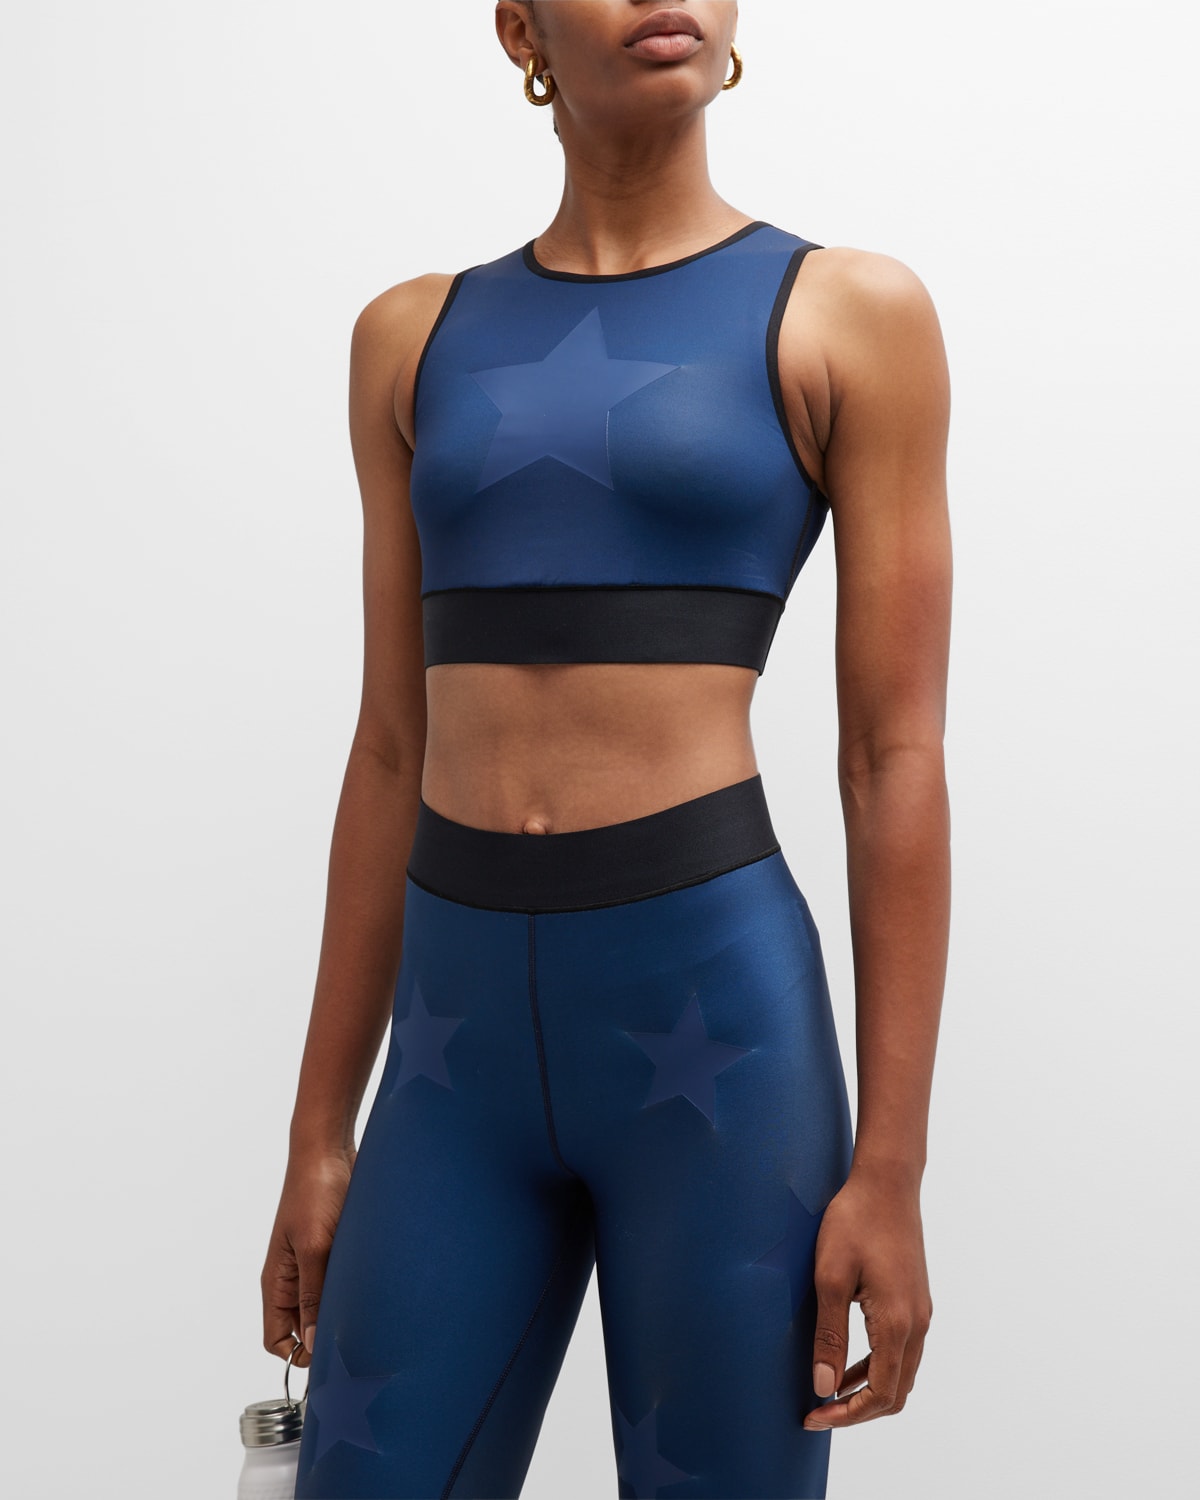 Lux Essential Star Knockout Level Crop Top